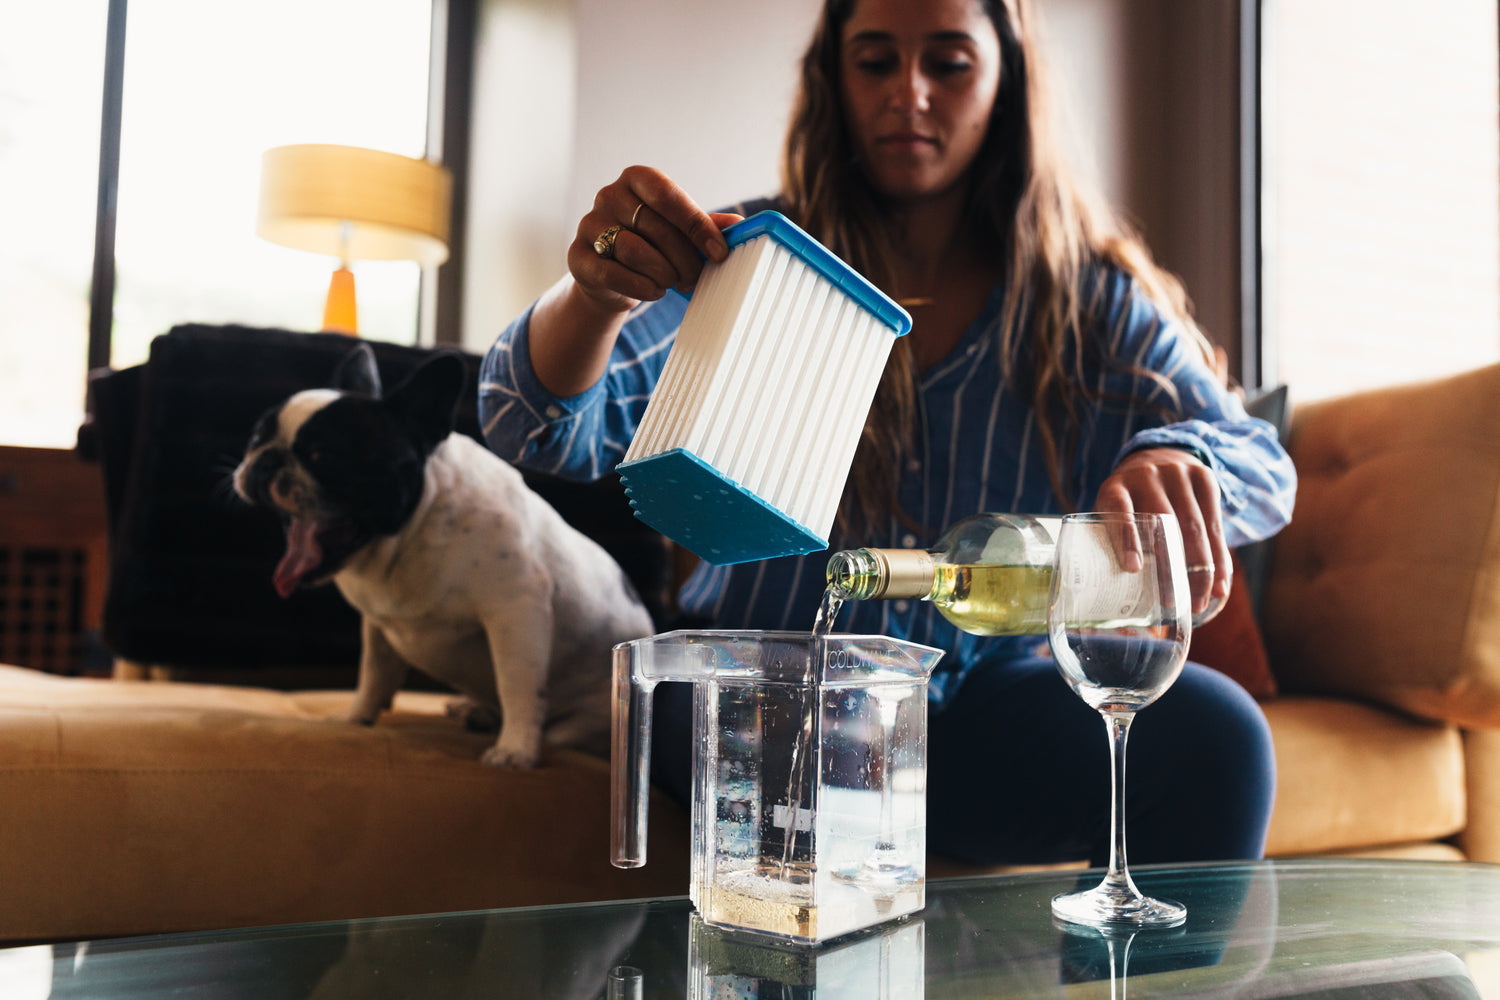 ColdWave beverage chiller review: How to chill drinks fast - Reviewed